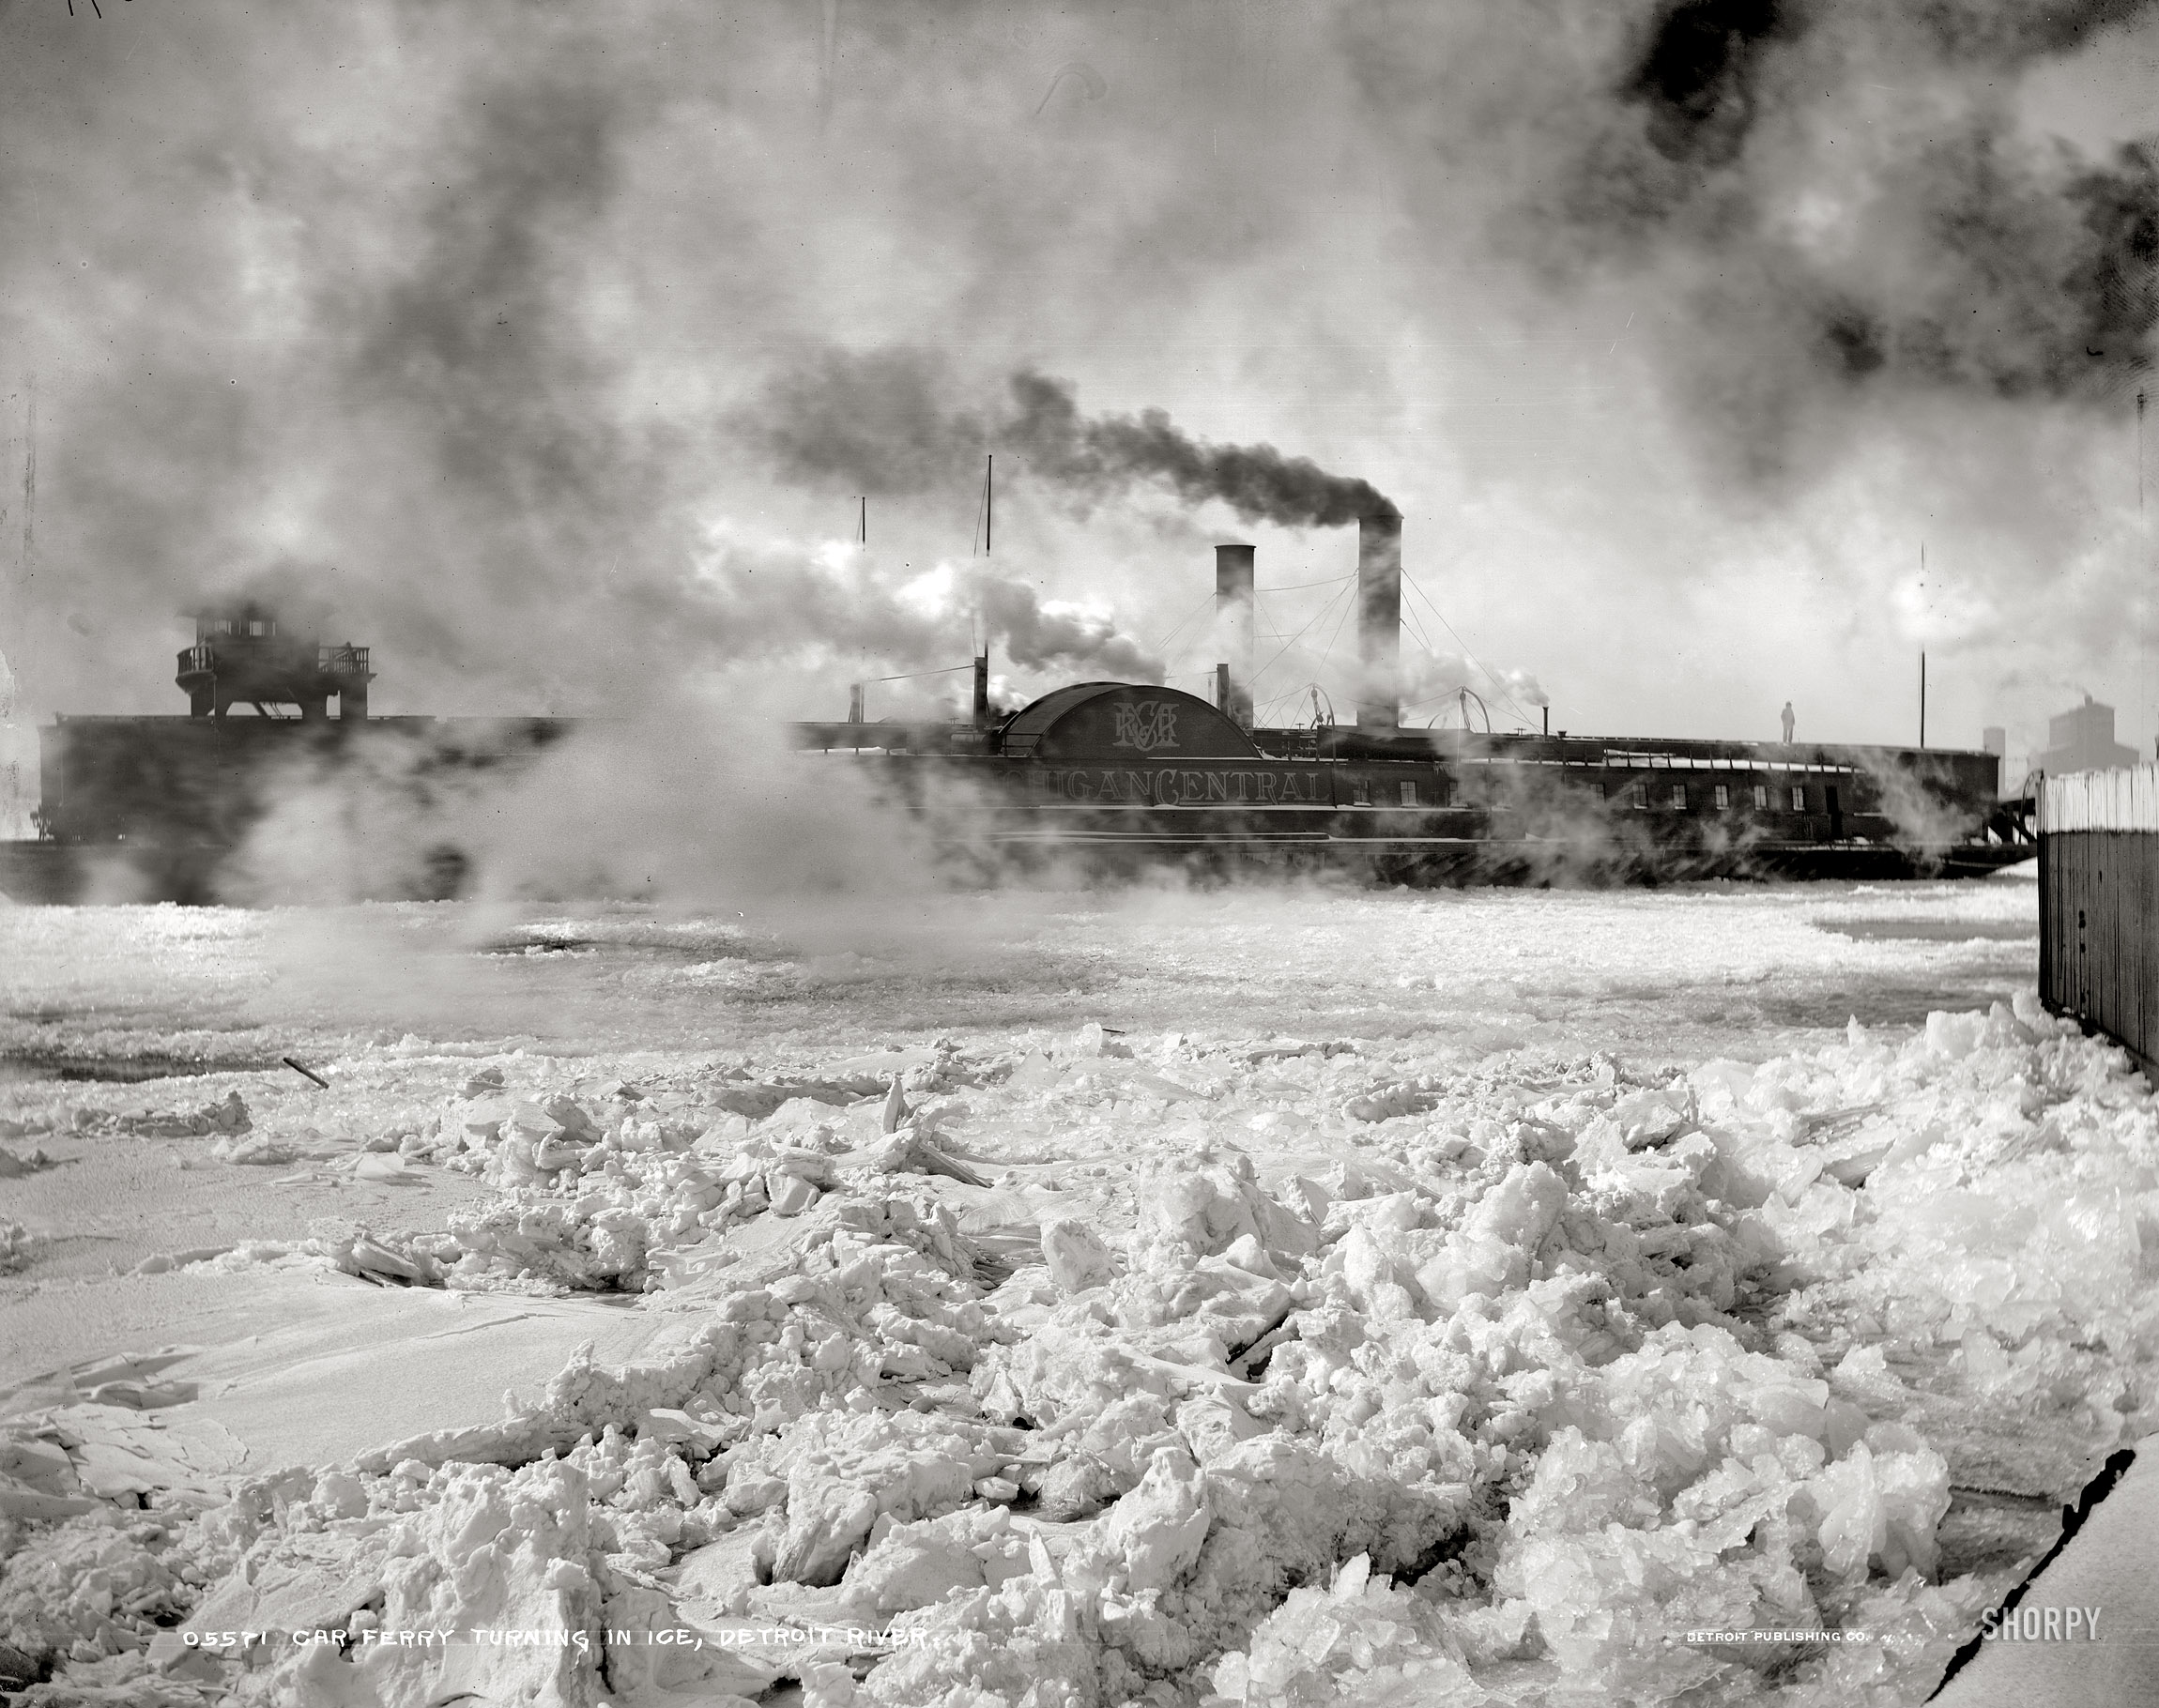 Circa 1900. "Detroit River. Car ferry Michigan Central turning in ice." Our third look at one of these railcar transports. Detroit Publishing. View full size.